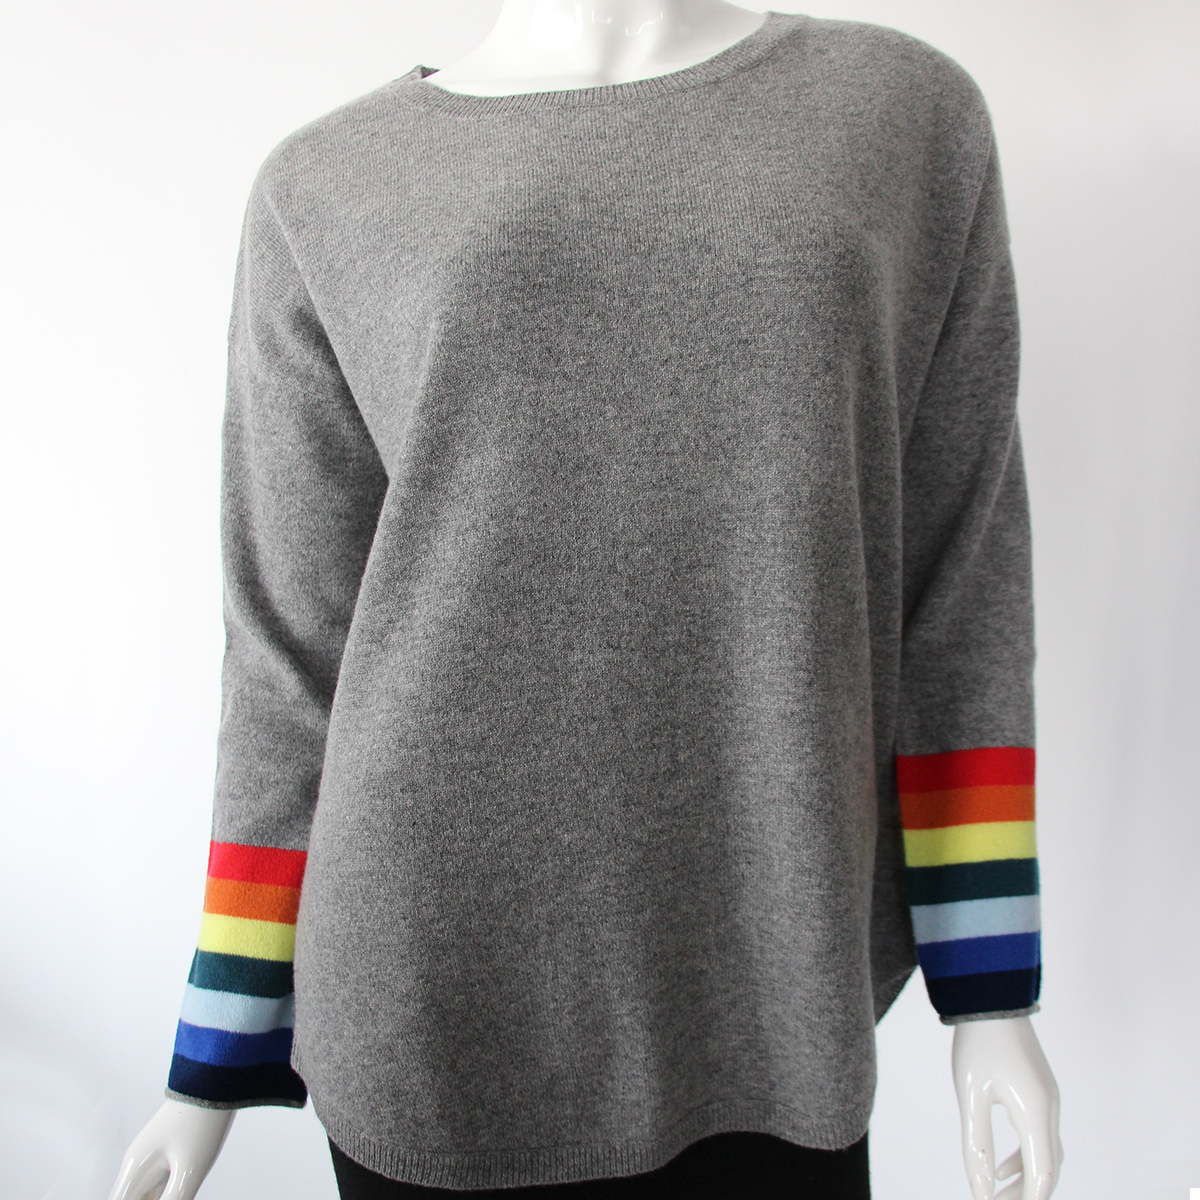 Cashmere sweater with rainbow channels on the cuffs W-32-7